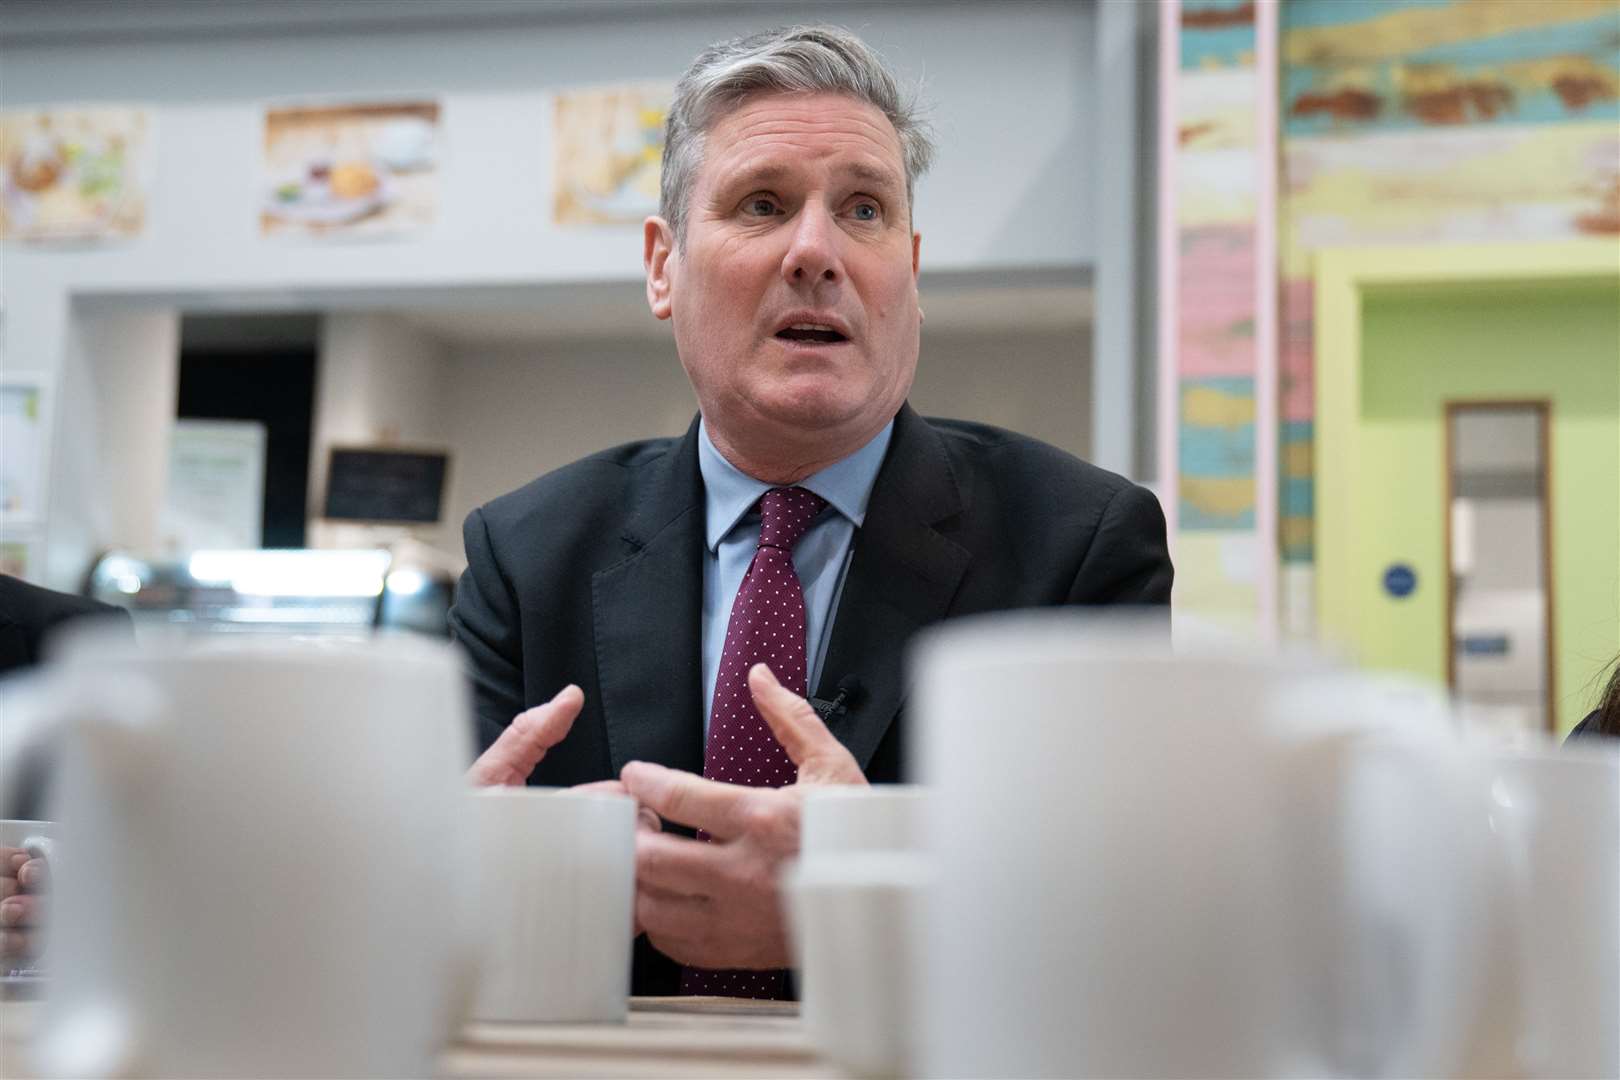 Labour leader Sir Keir Starmer repeated his promise to halve levels of violence against women and girls as he met with charities supporting victims on Thursday (Stefan Rouseau/PA)